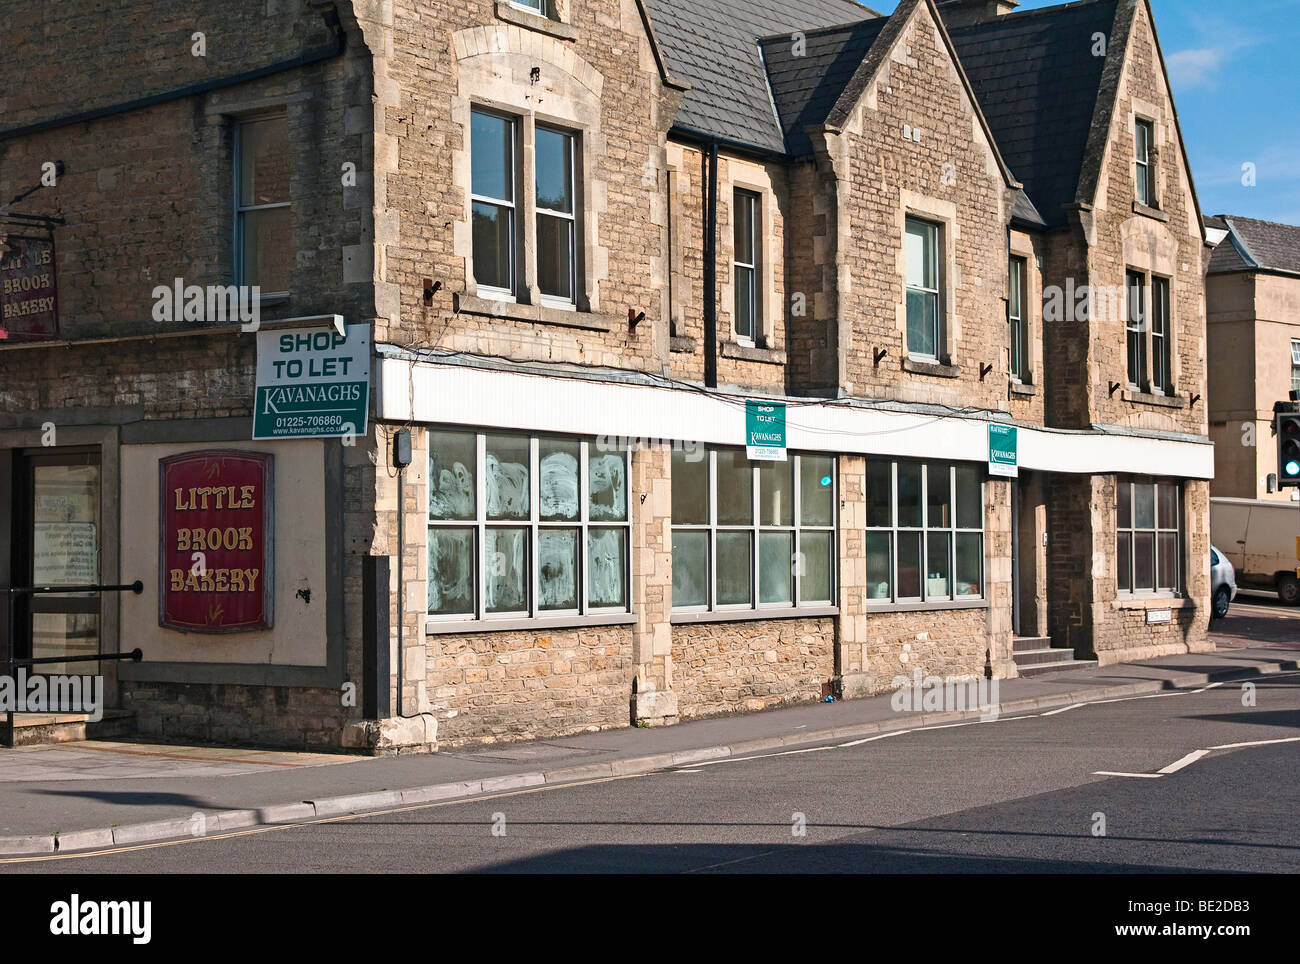 Shops to let in Melksham Wiltshire UK during recession 2009 Stock Photo